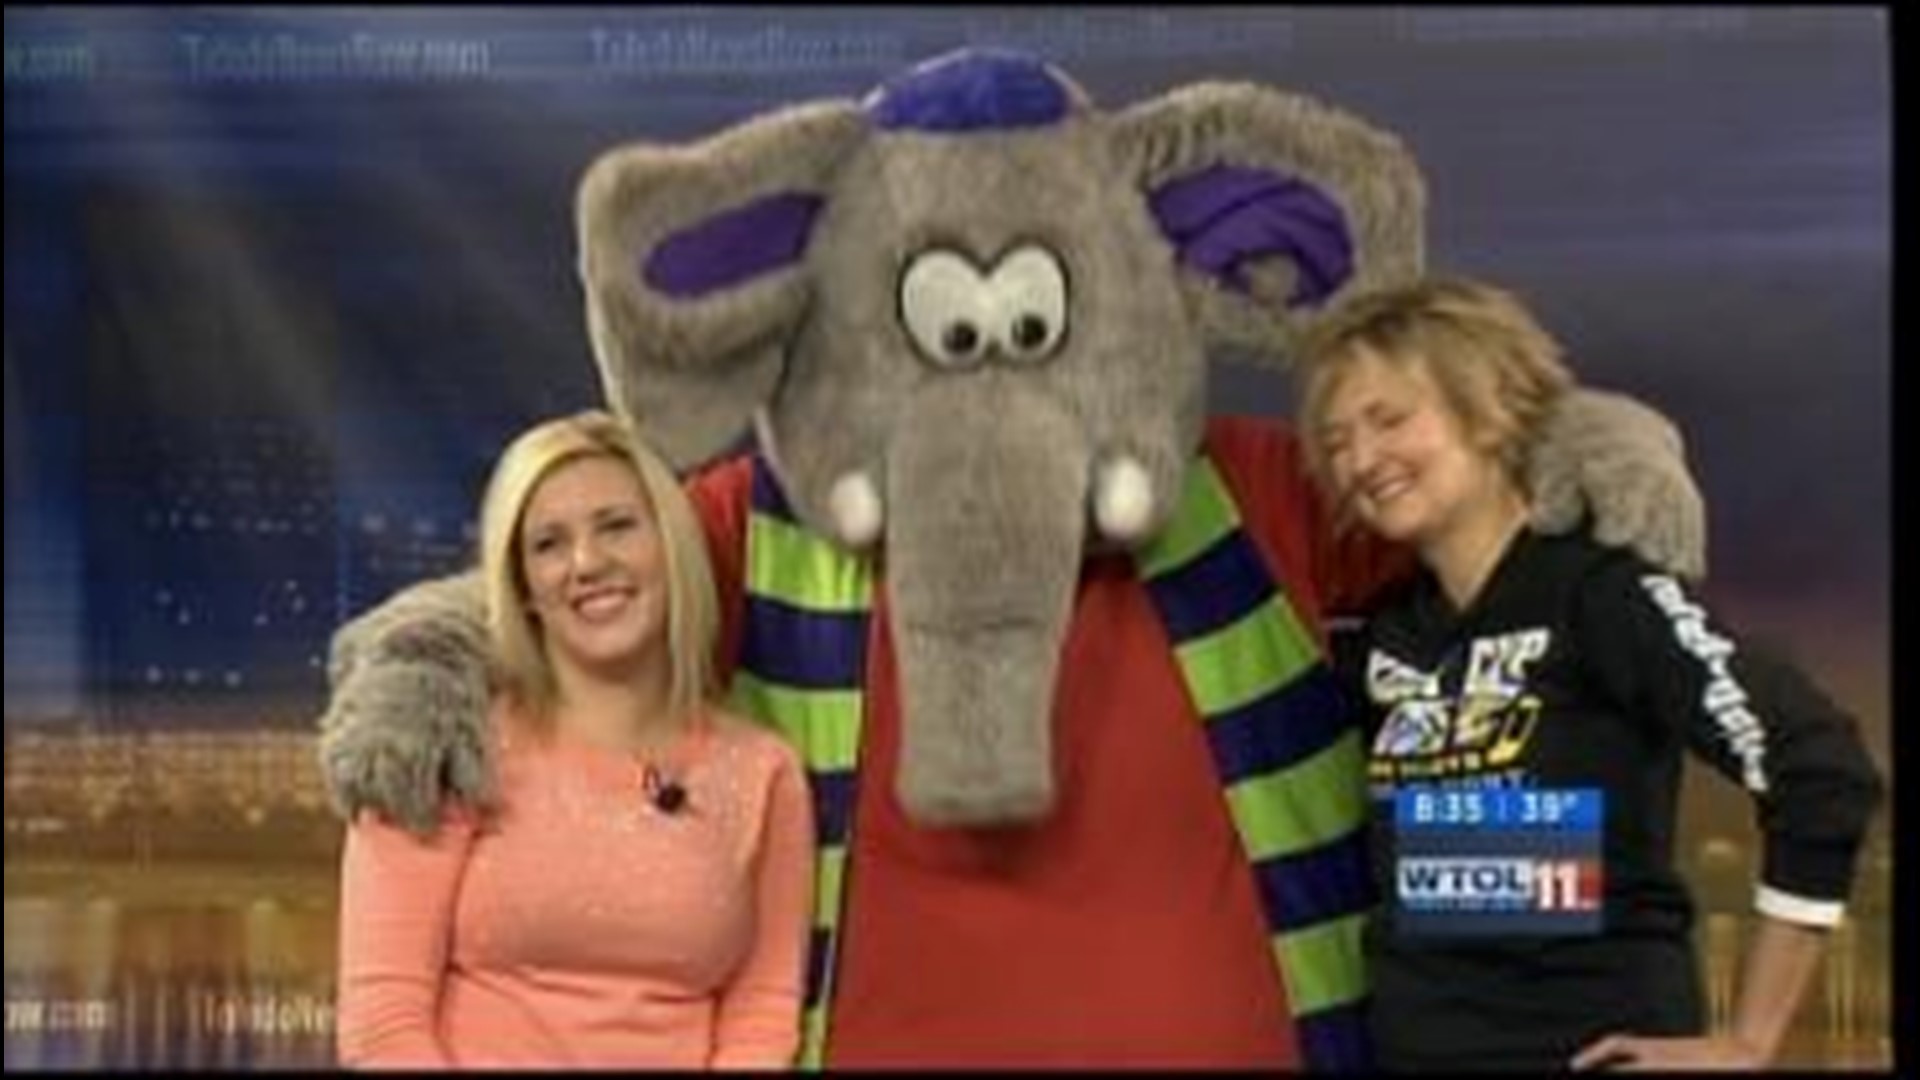 Fur Circus comes to Toledo Walleye game